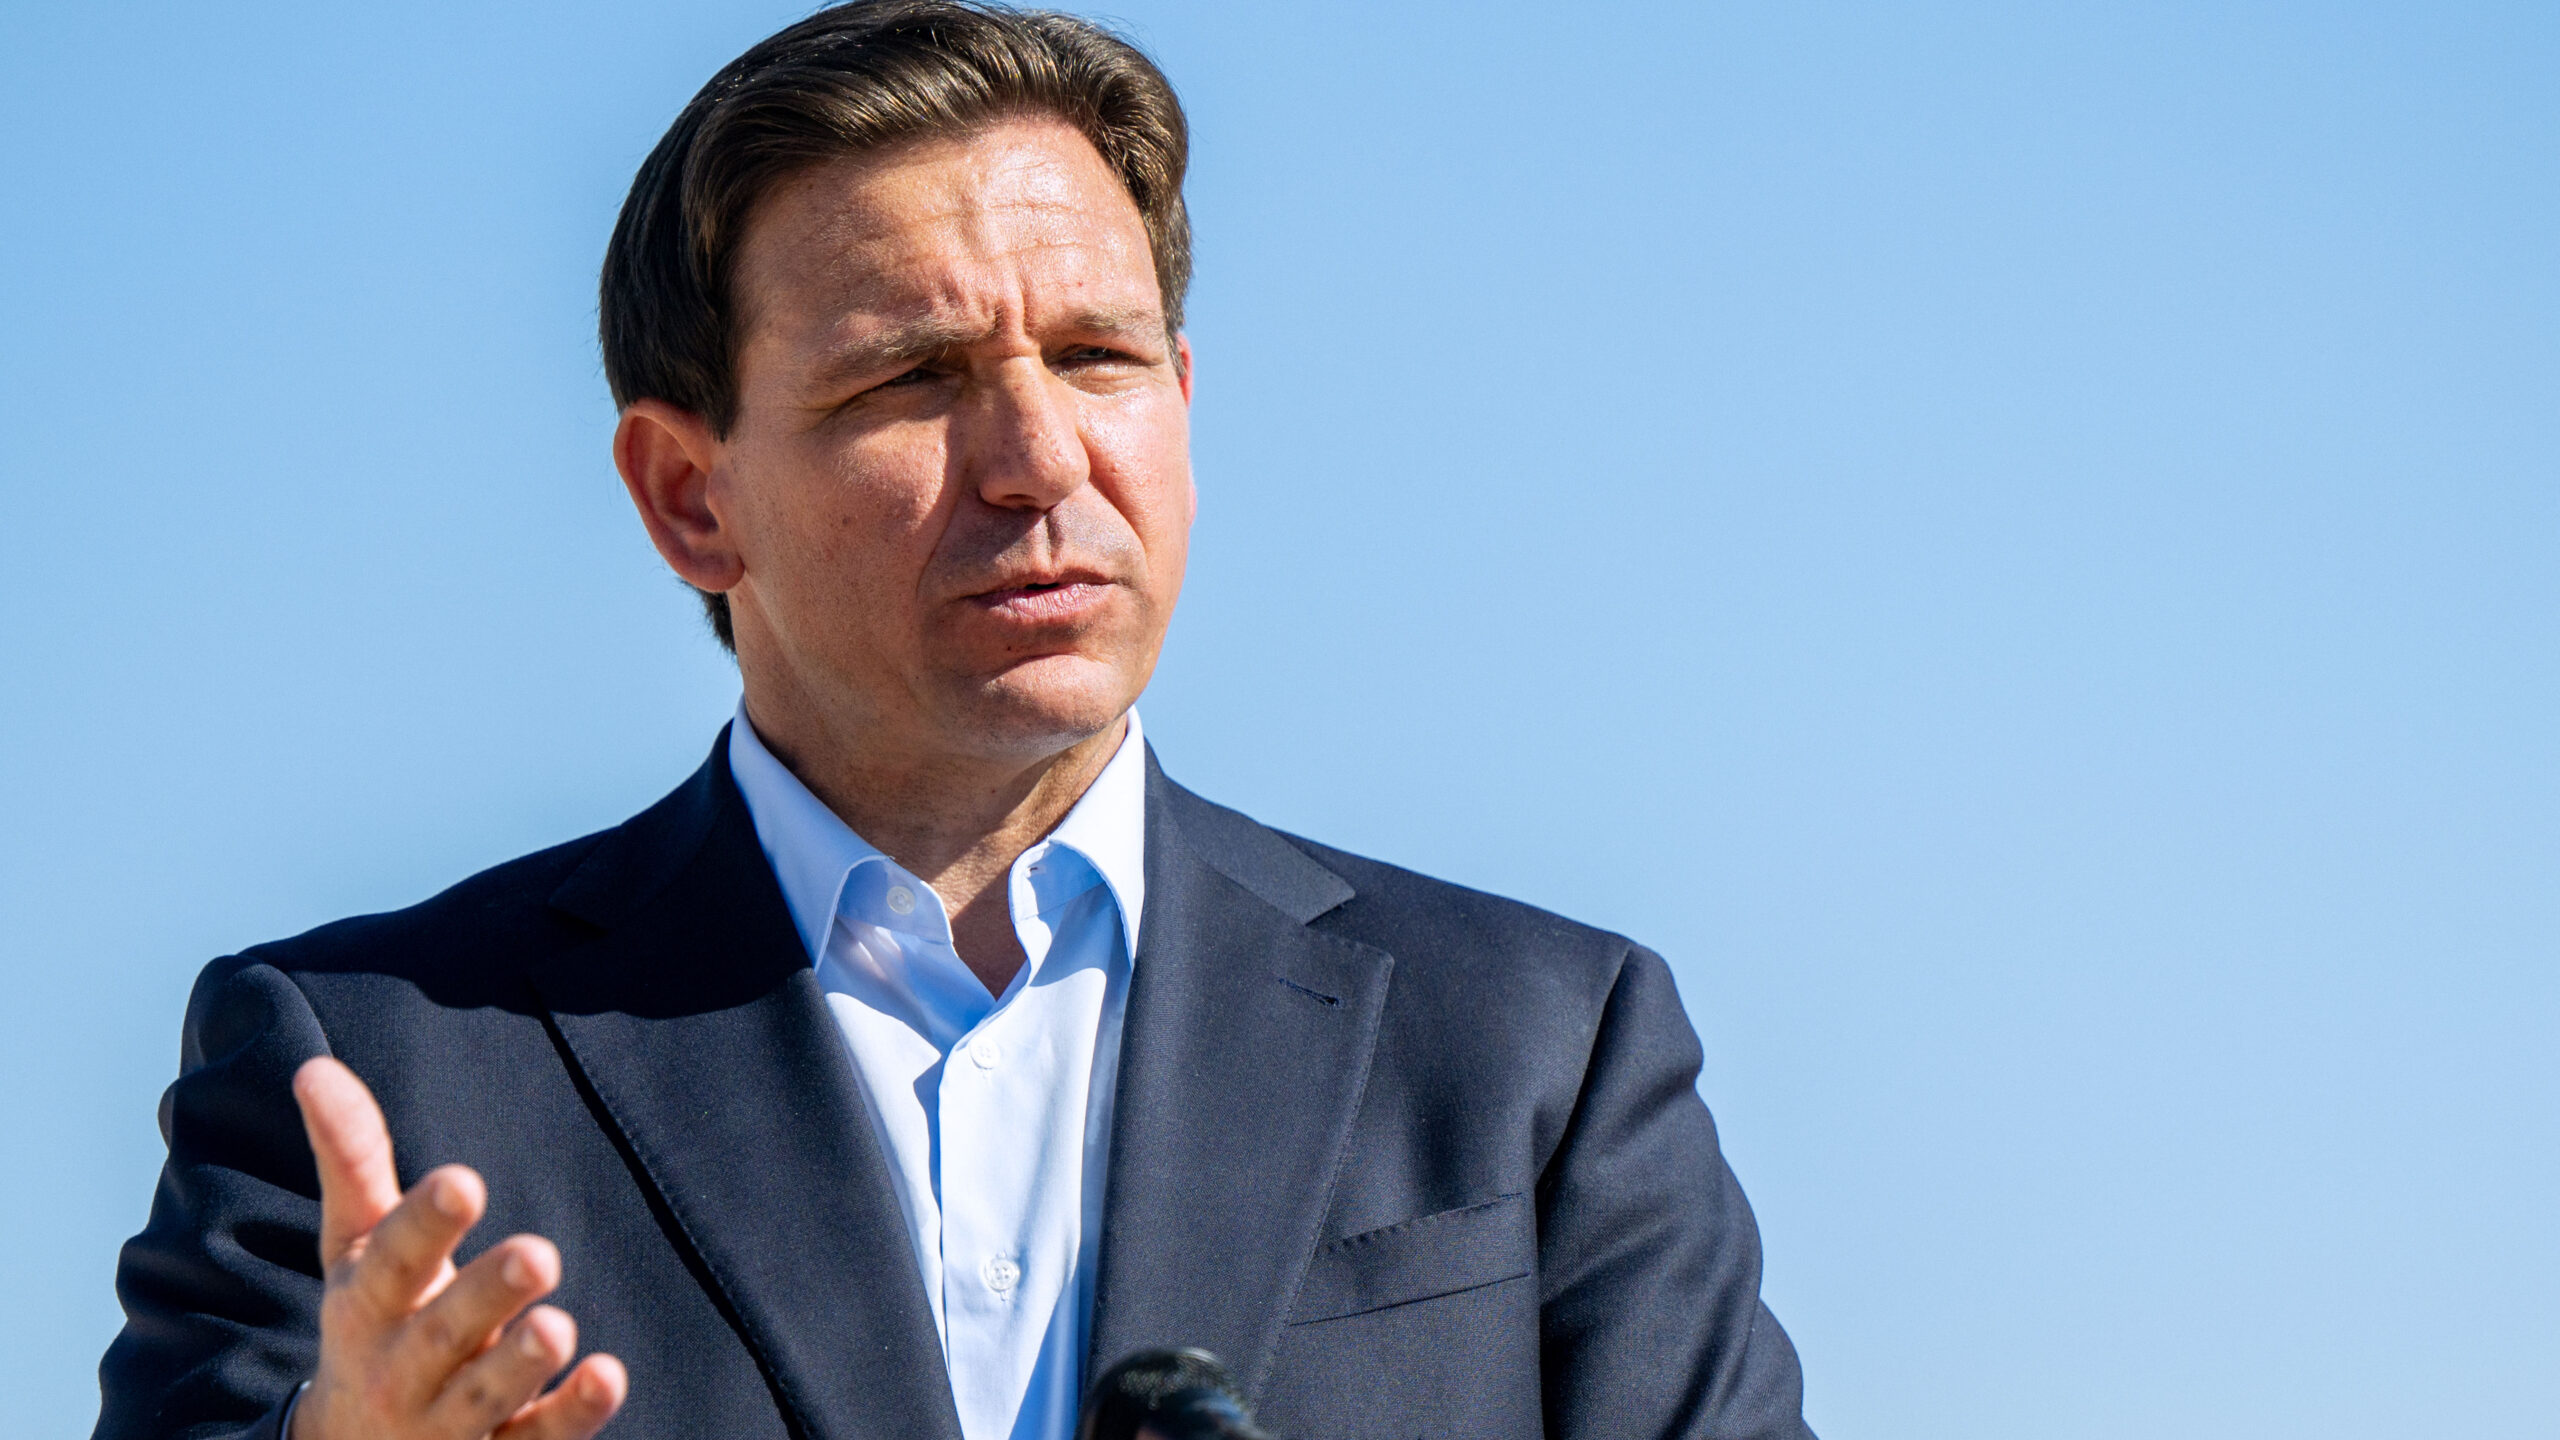 DeSantis Proposes Plan He Says Will Achieve  Gas, Turn U.S. Into World’s Top Energy Producer